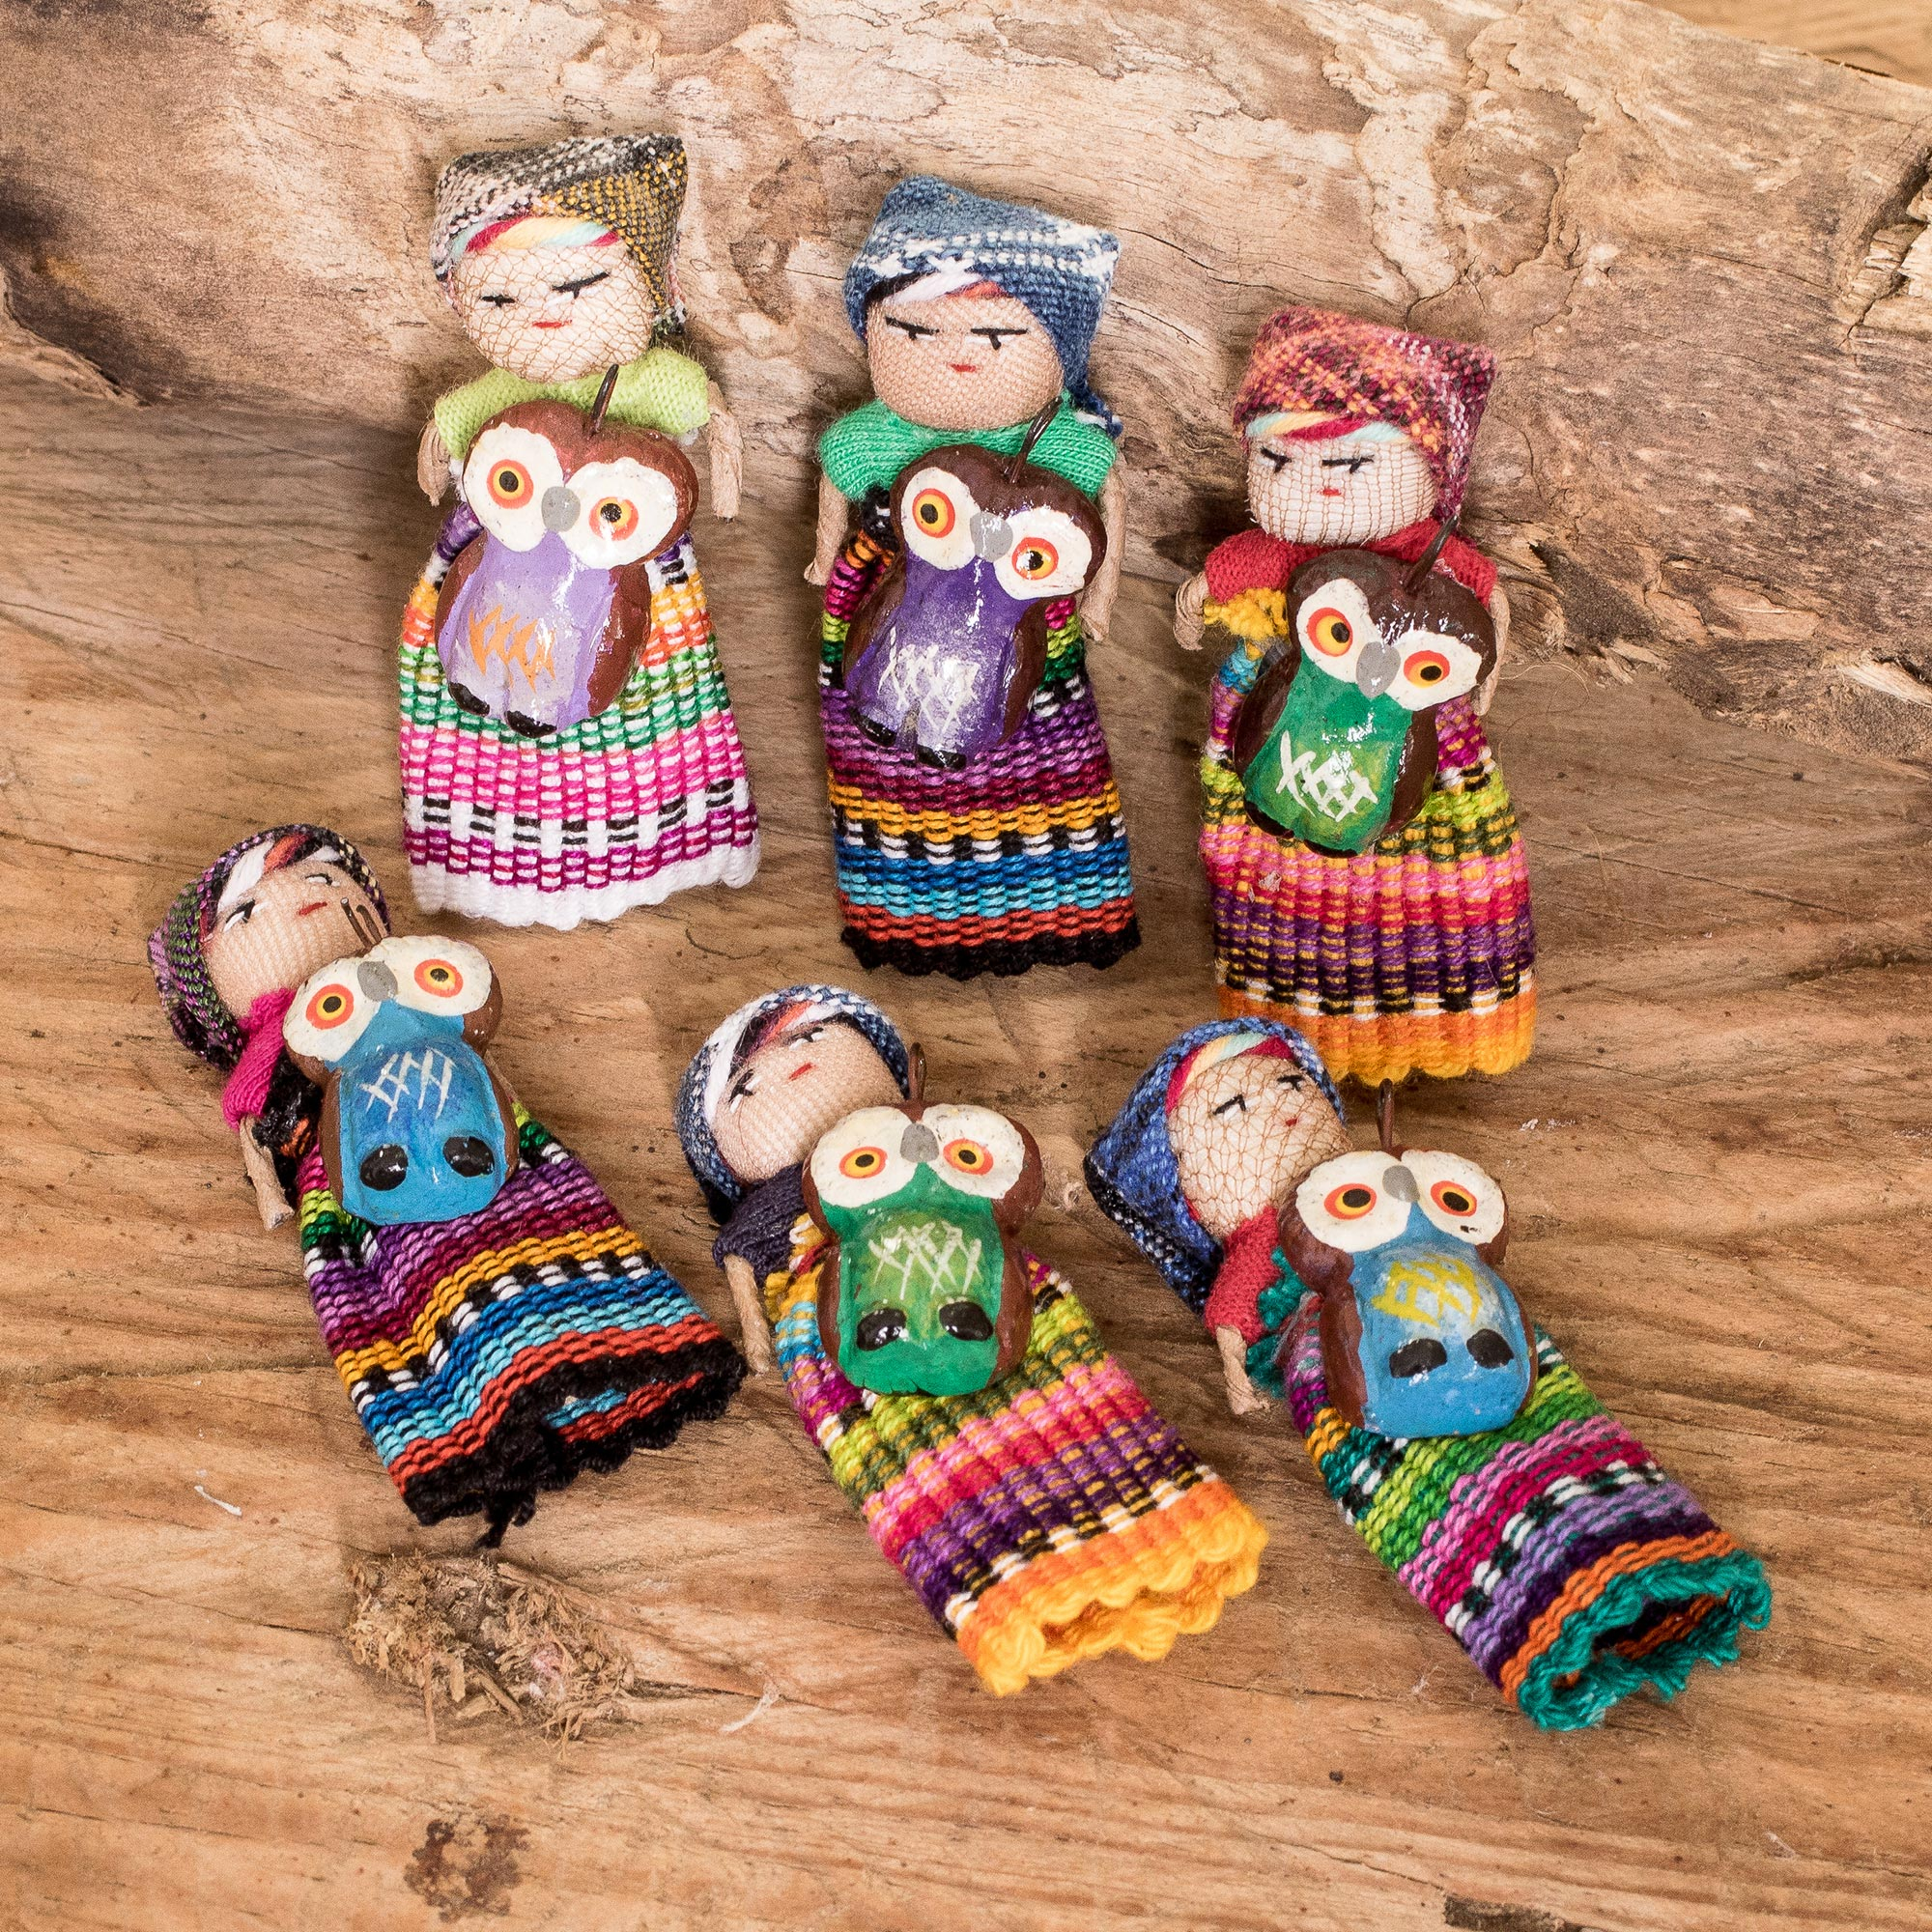 Set of 100 Worry Dolls with Pouch in 100% Cotton - The Worry Doll